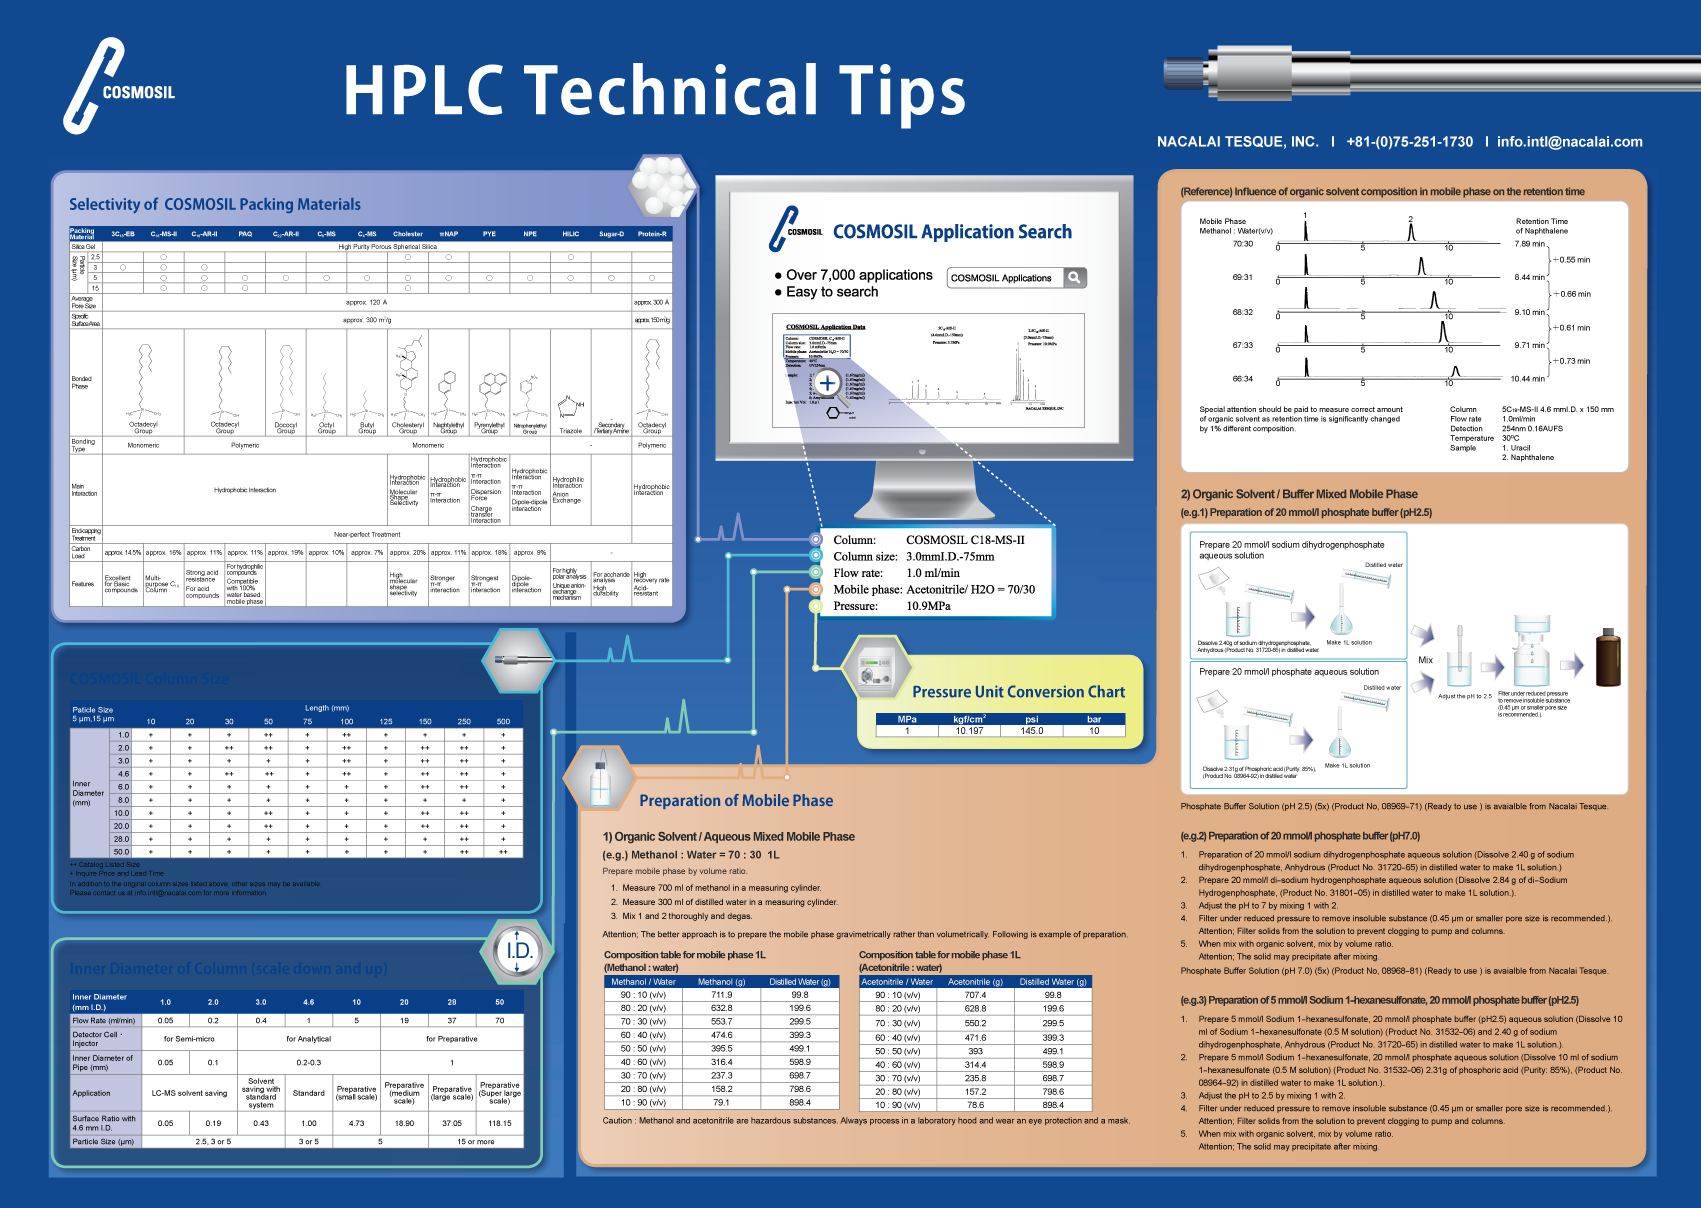 HPLC_Technical_Tips_Poster